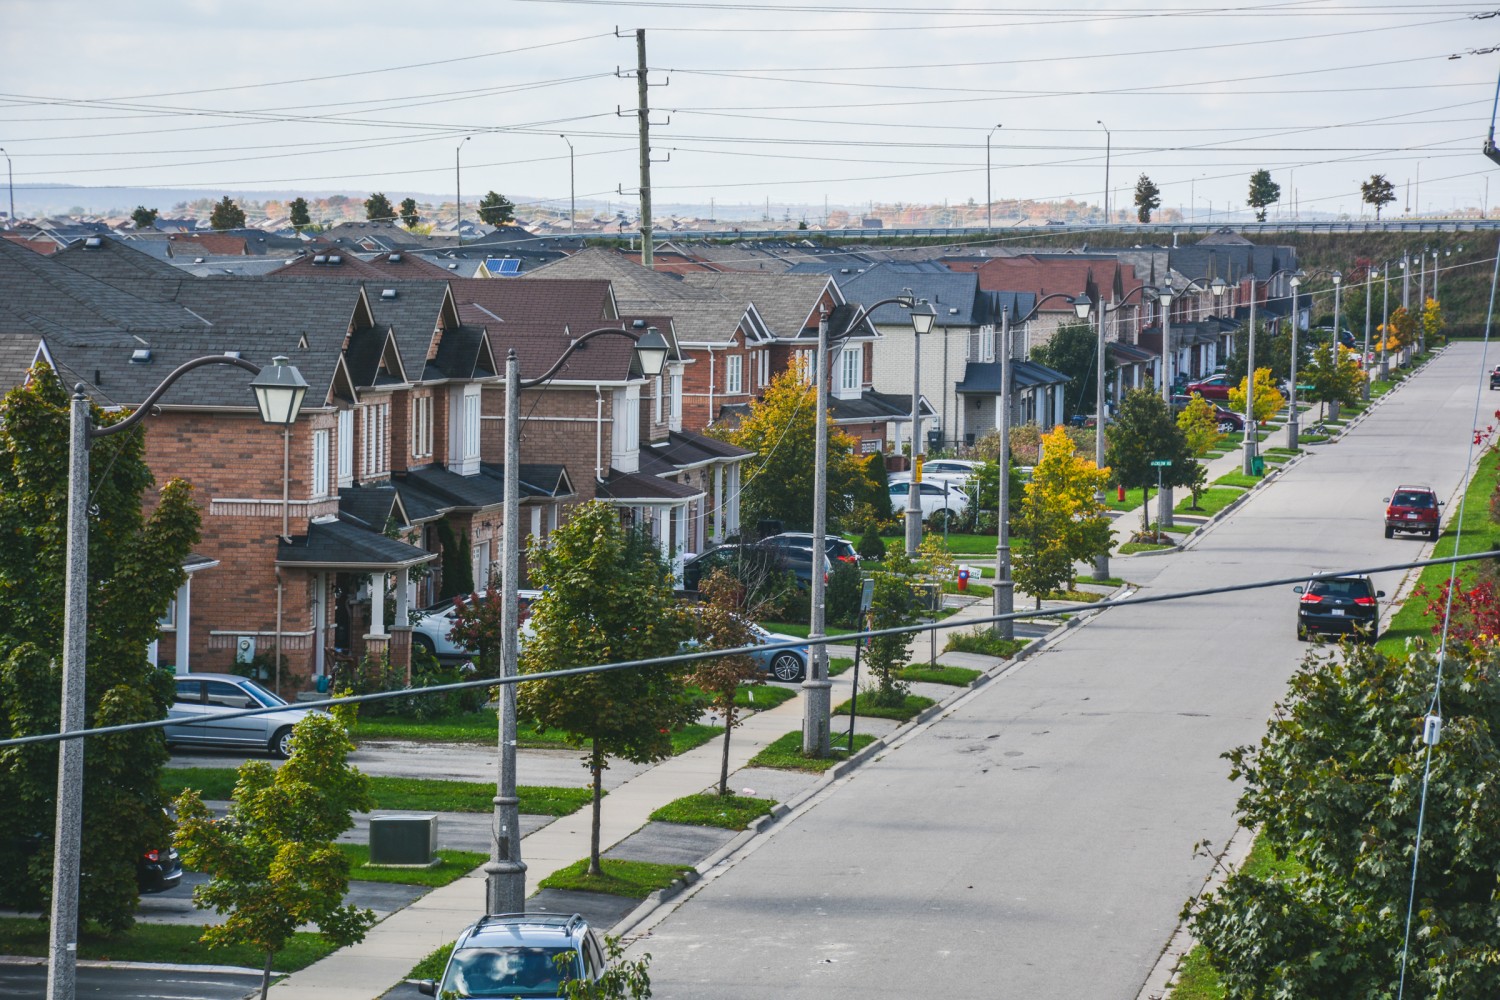 Finding reason and balance in Brampton’s suburban bliss as the threat of climate change looms